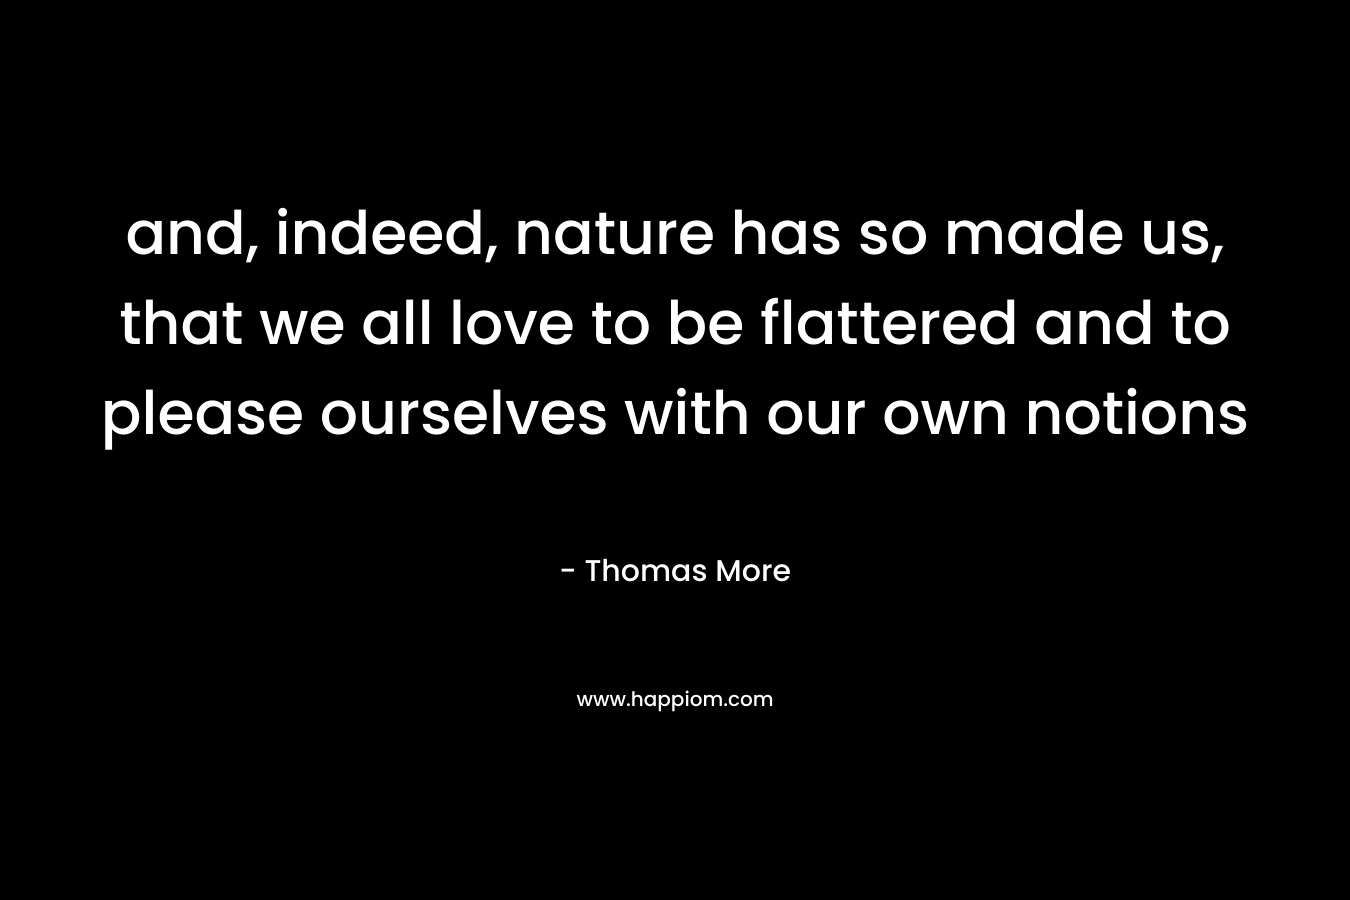 and, indeed, nature has so made us, that we all love to be flattered and to please ourselves with our own notions